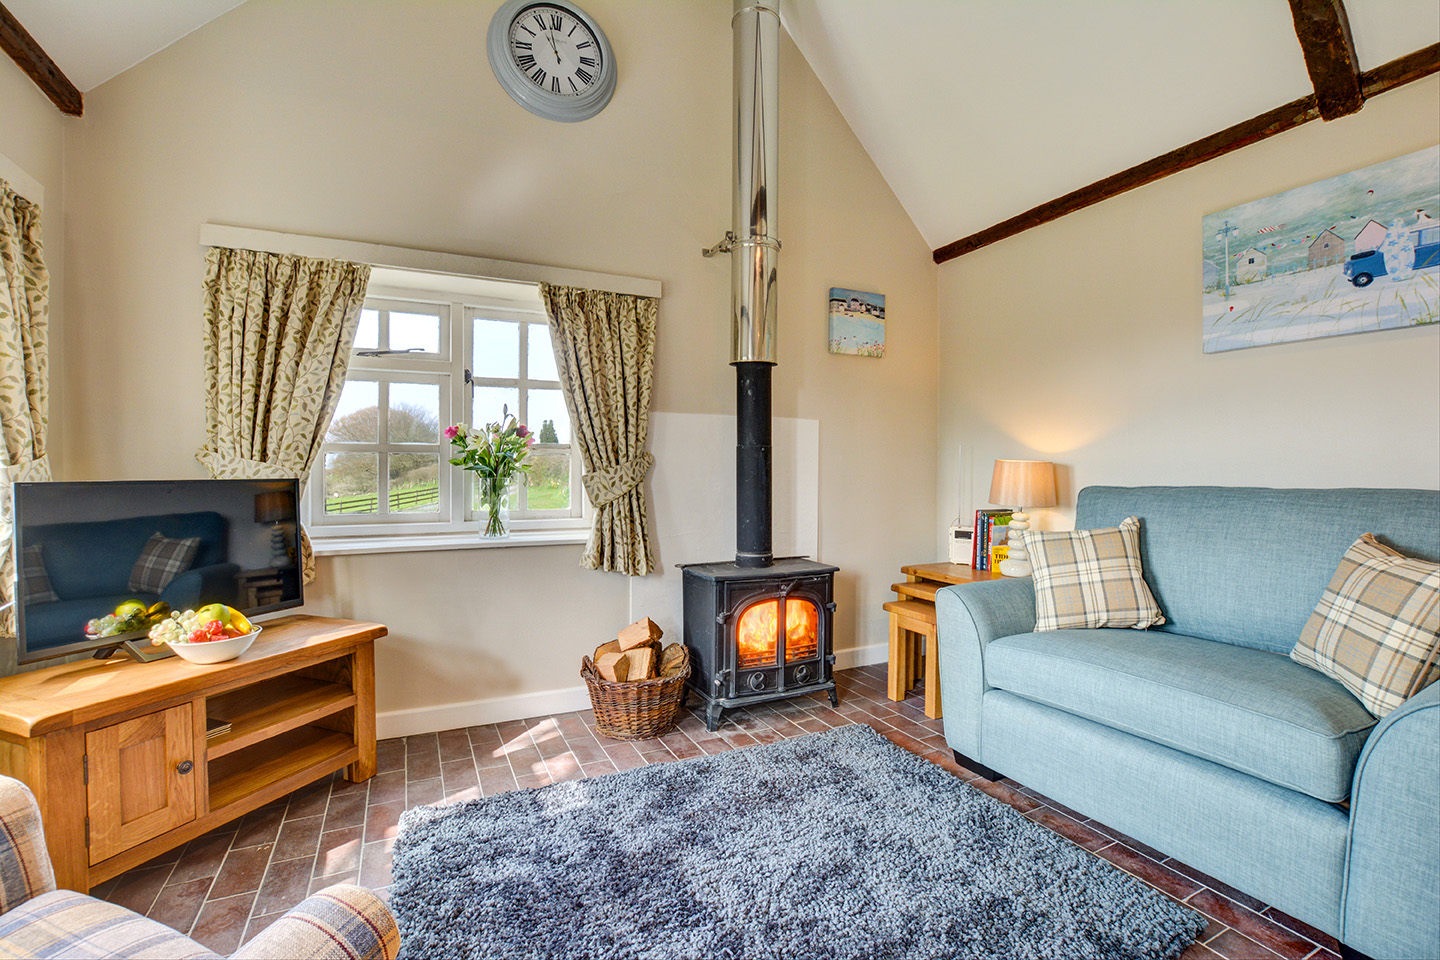 The lounge at Jingles luxury self catering holiday cottage at Penrose Burden in North Cornwall near Bodmin Moor01.jpg